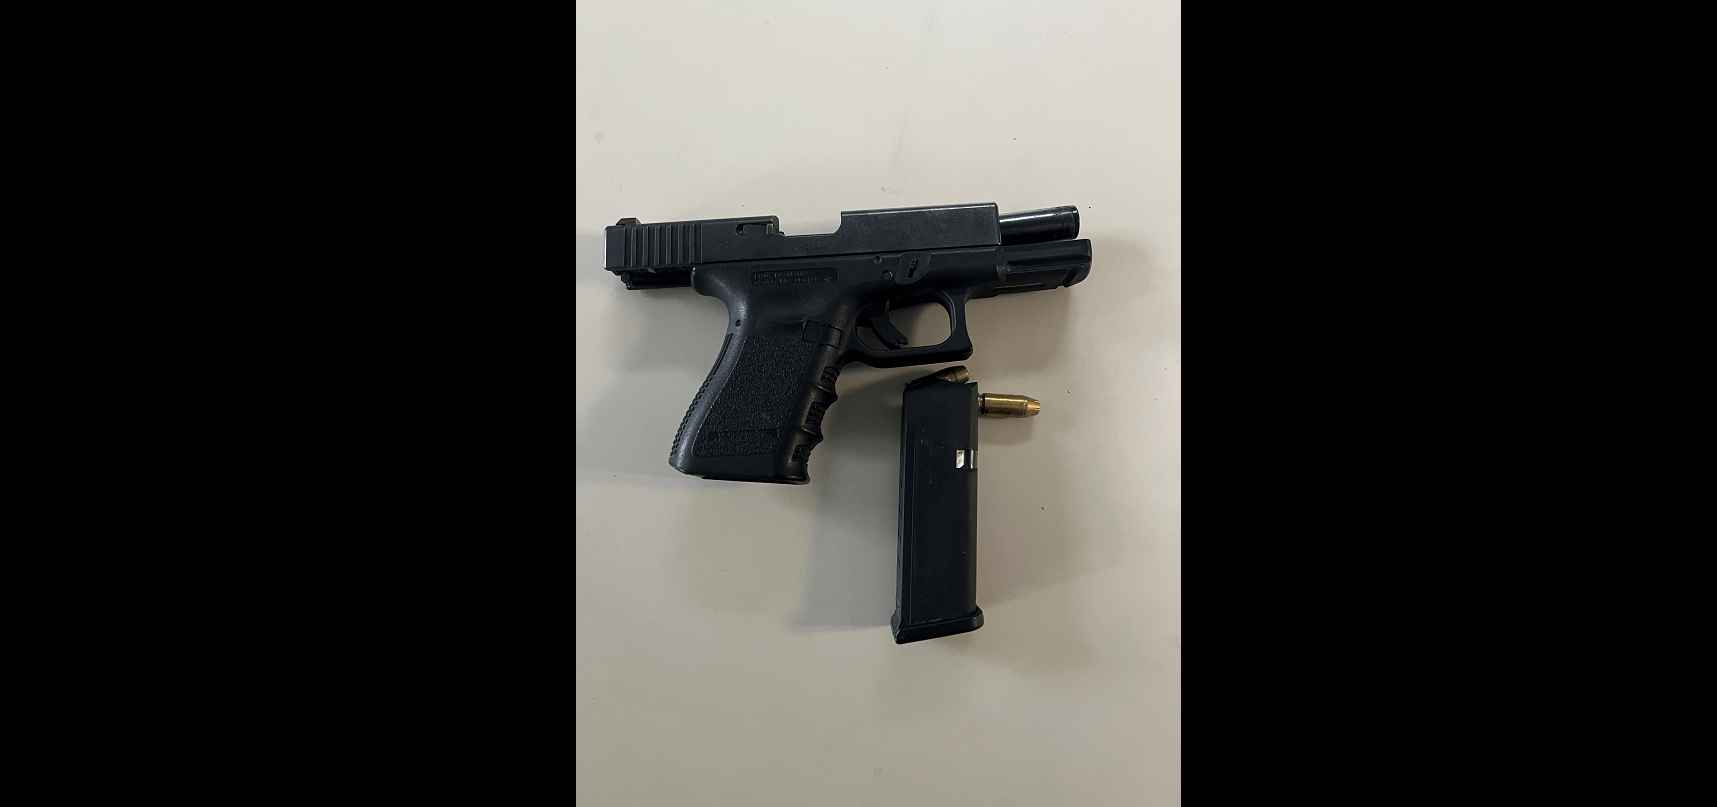 handgun-confiscated-from-clarence-thompson-santa-rosa-police